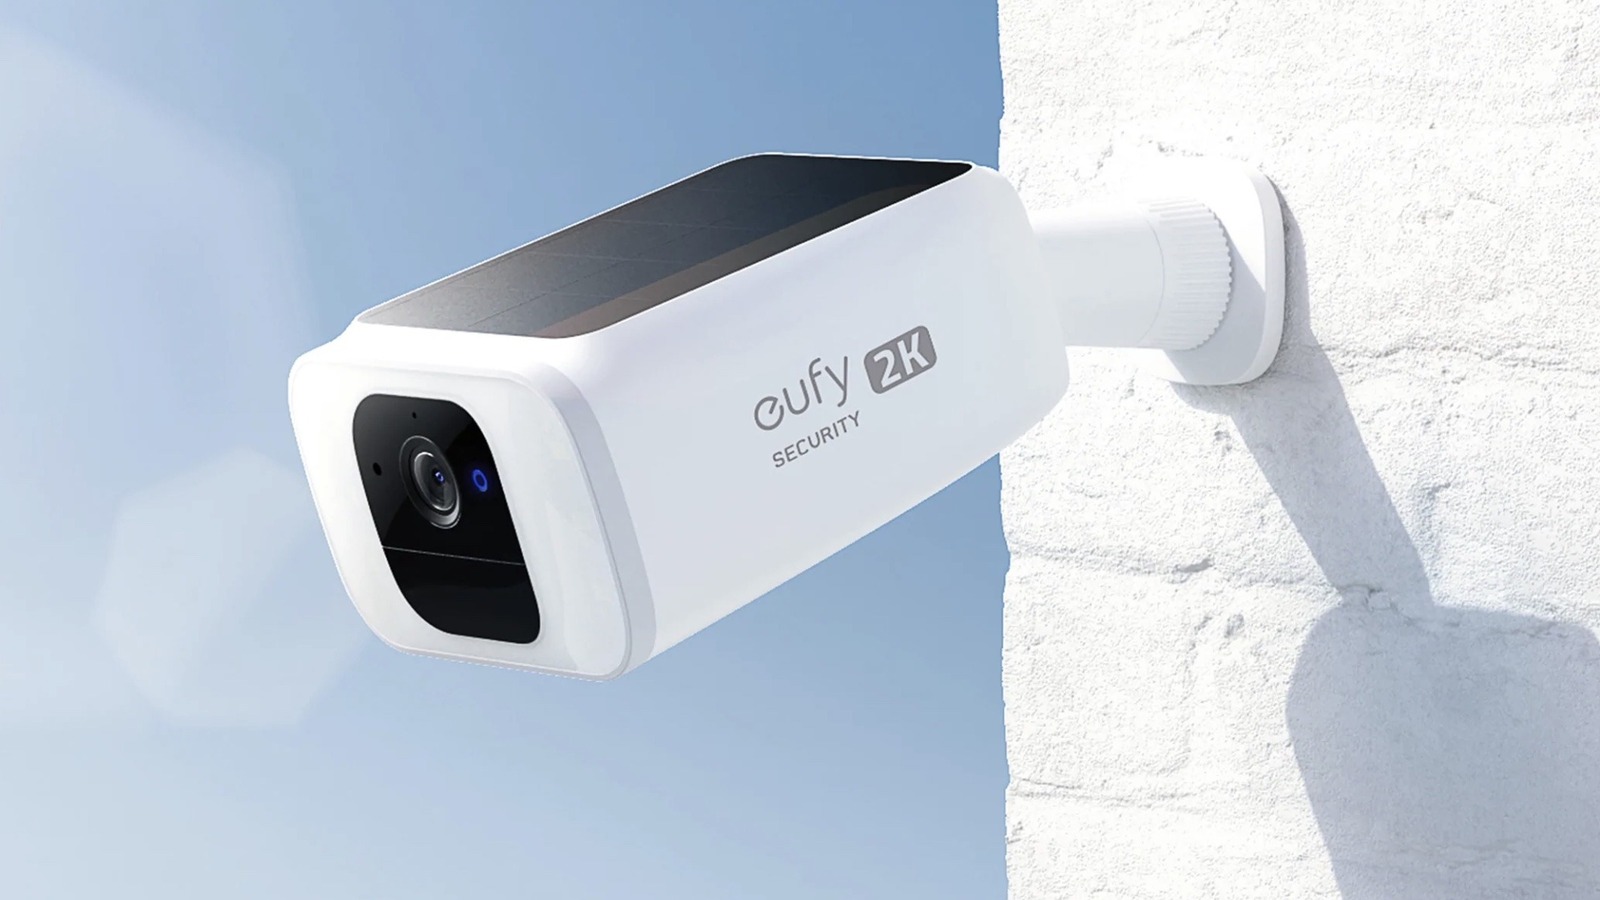 How To Turn Off Alarm On Eufy Security Camera